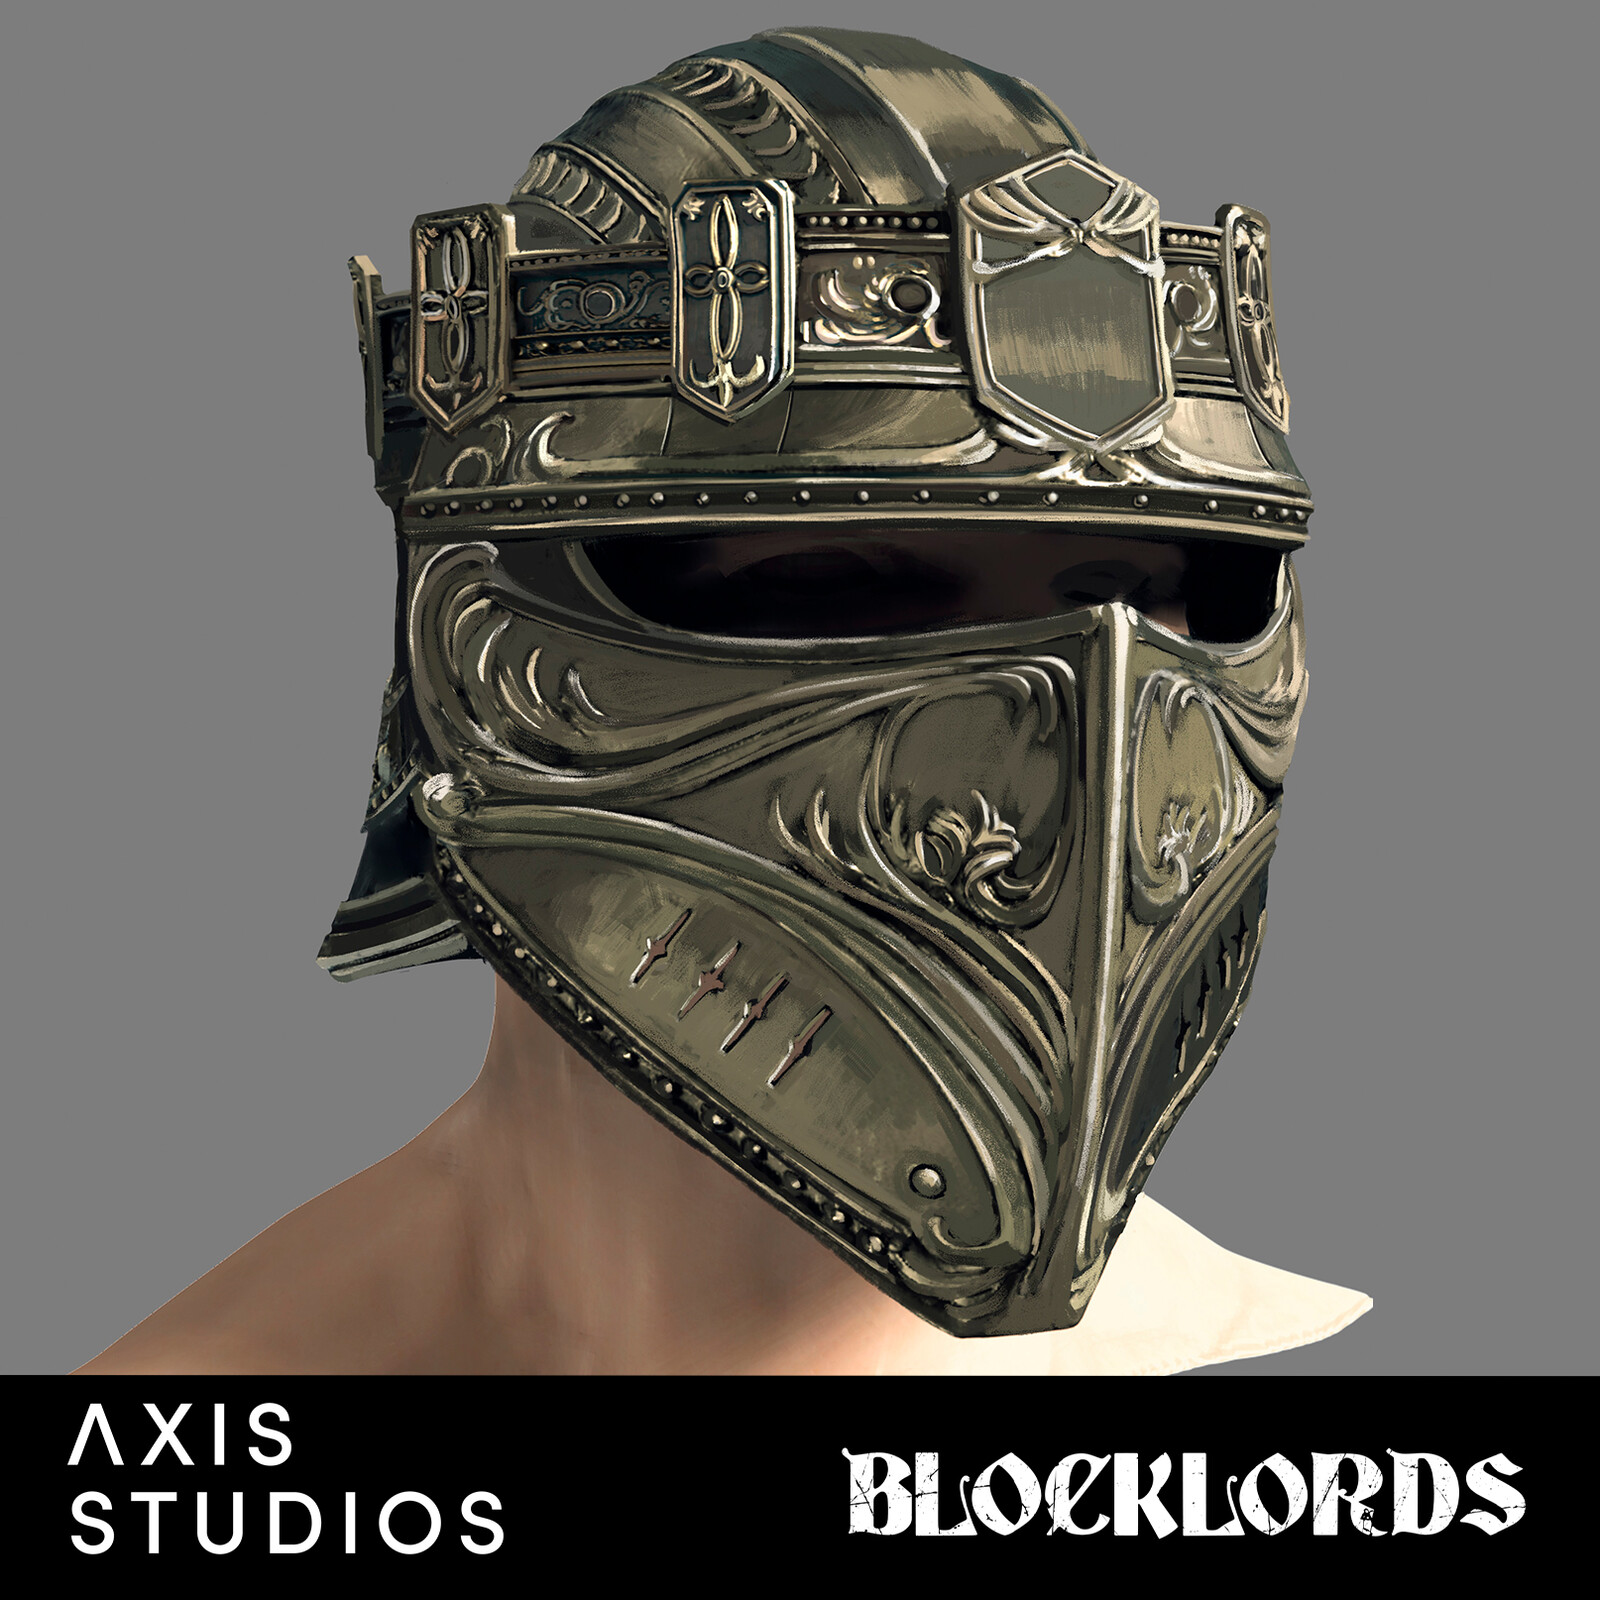 King's Helmet_Protect Your House_Blocklords